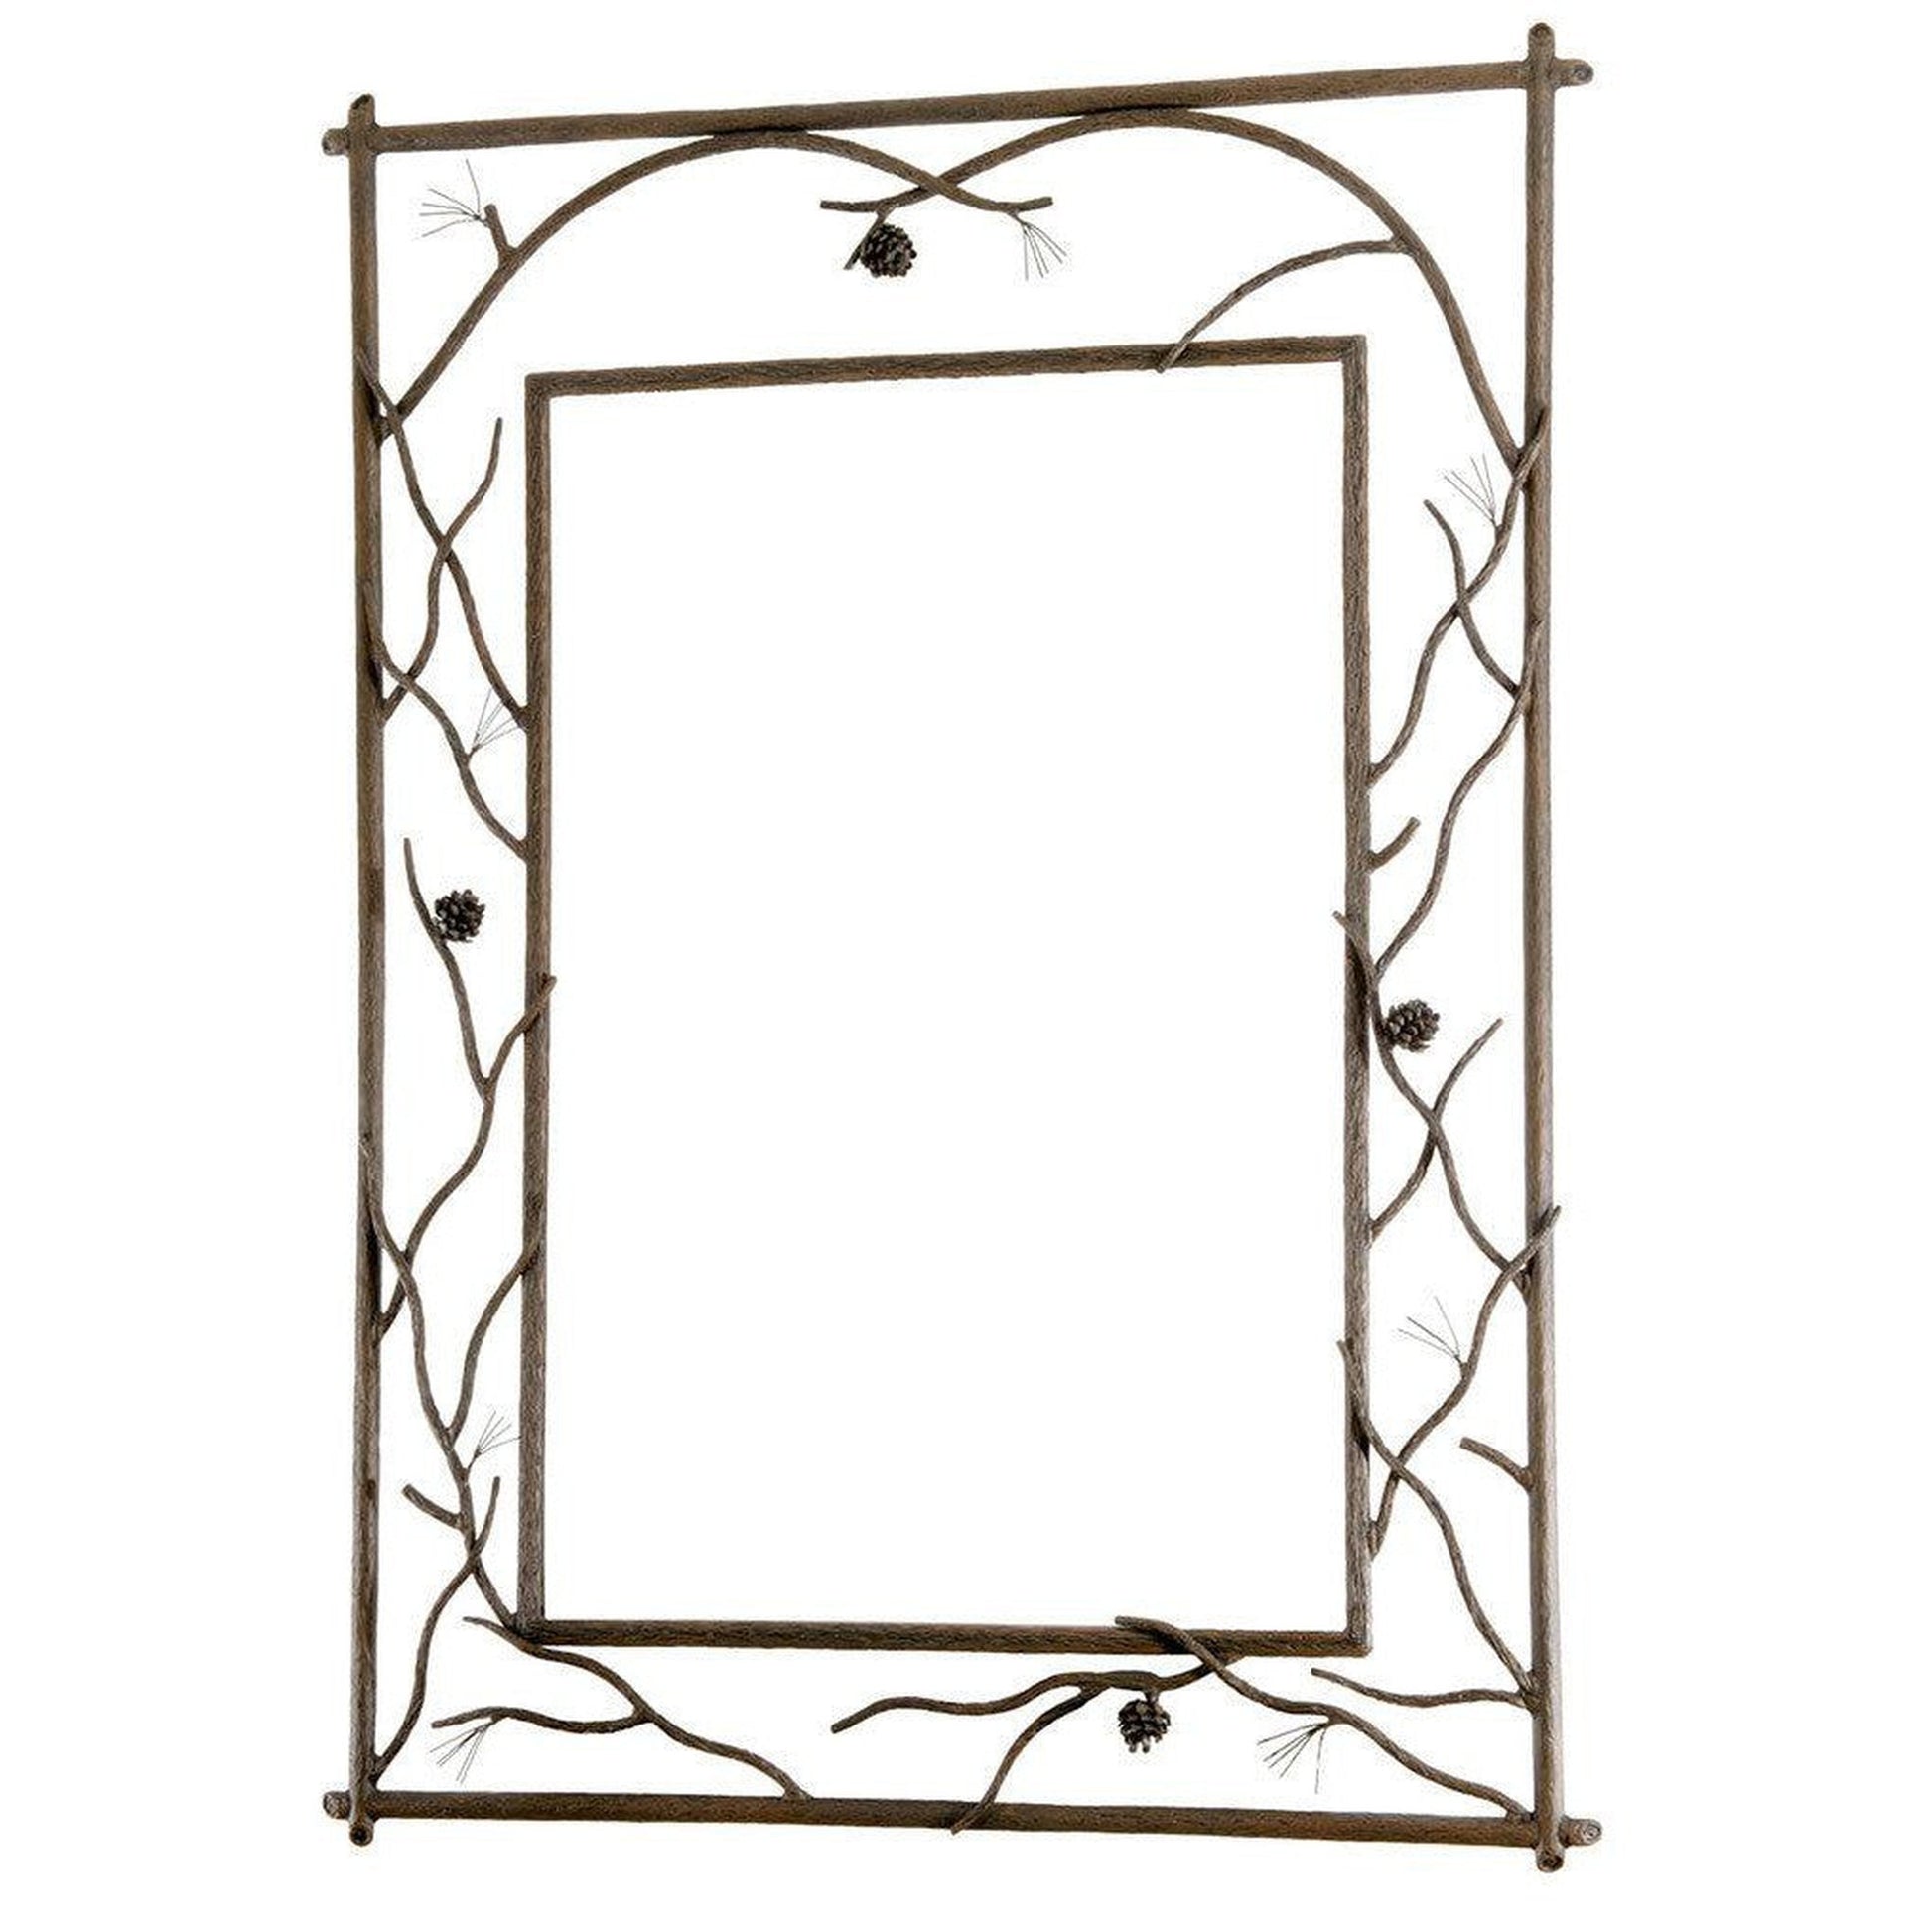 Stone County Ironworks Pine 37" x 51" Large Hand Rubbed Ivory Branched Iron Wall Mirror With Gold Iron Accent